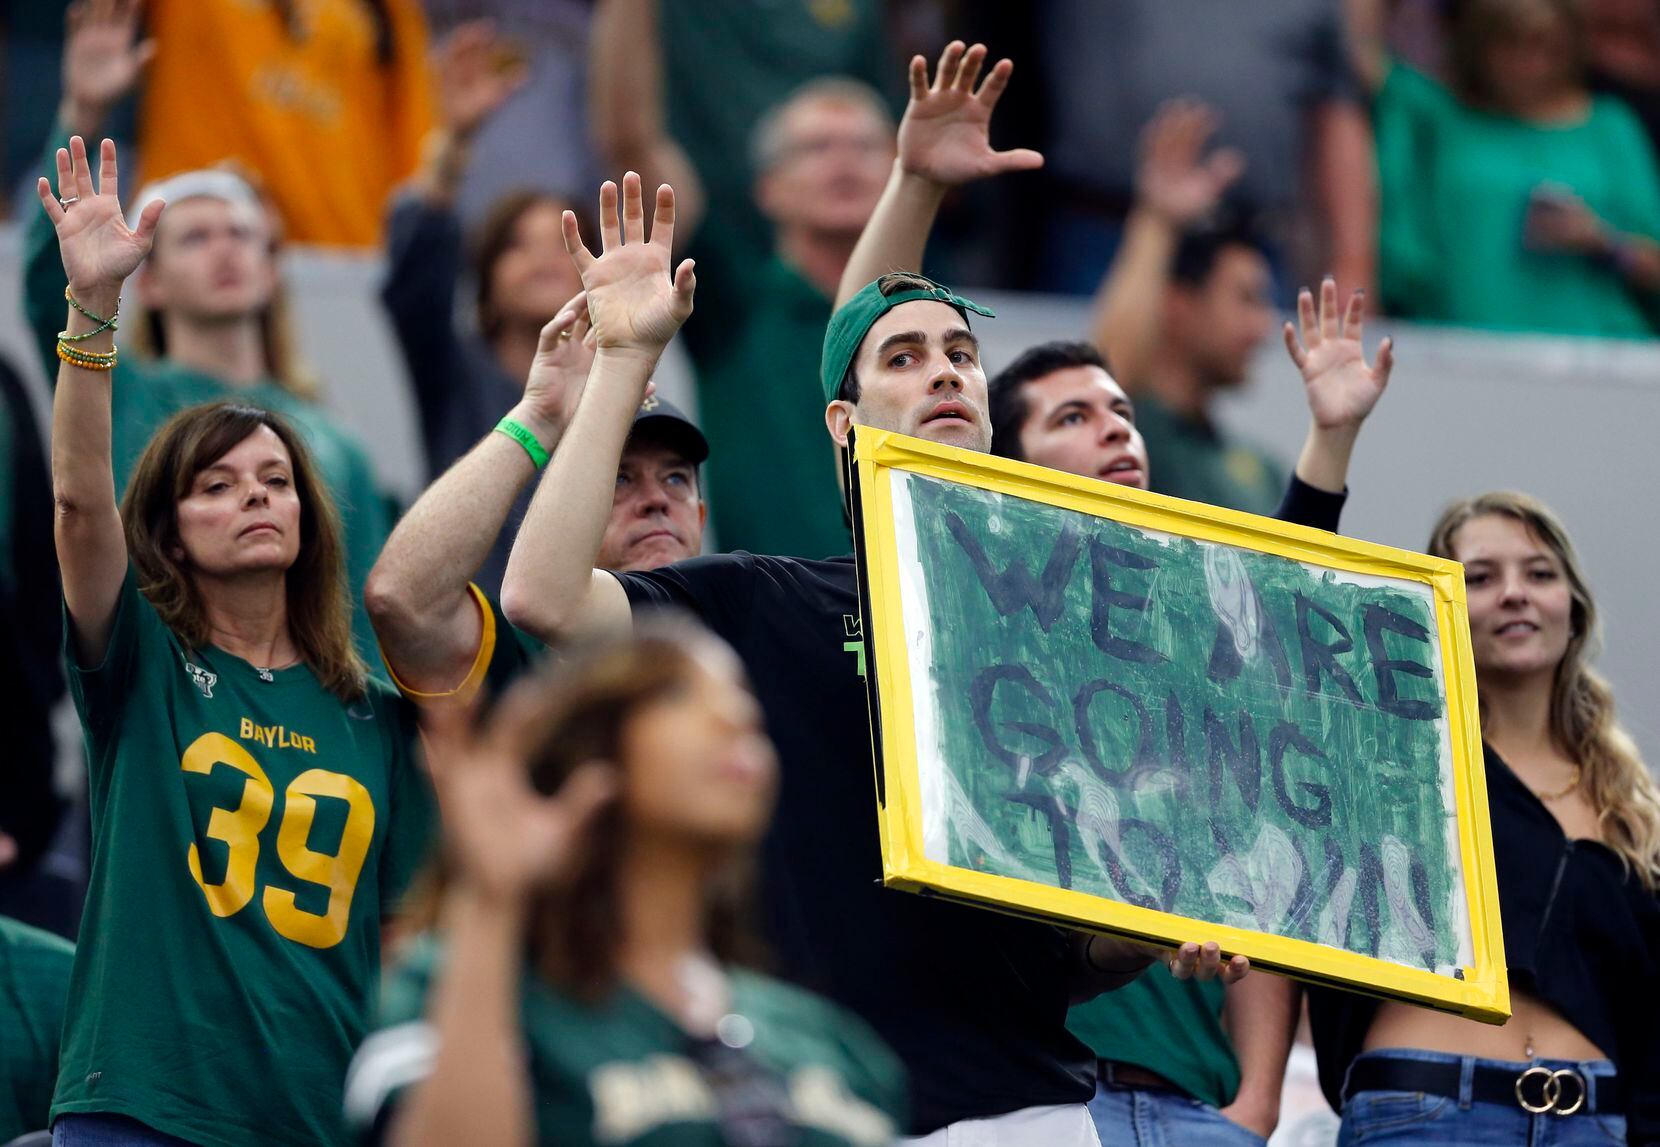 Baylor fans show their spirit in the stands before the start of the Big 12 Championship football game against Oklahoma State at AT&T Stadium in Arlington on Saturday, December 4, 2021. (John F. Rhodes / Special Contributor)